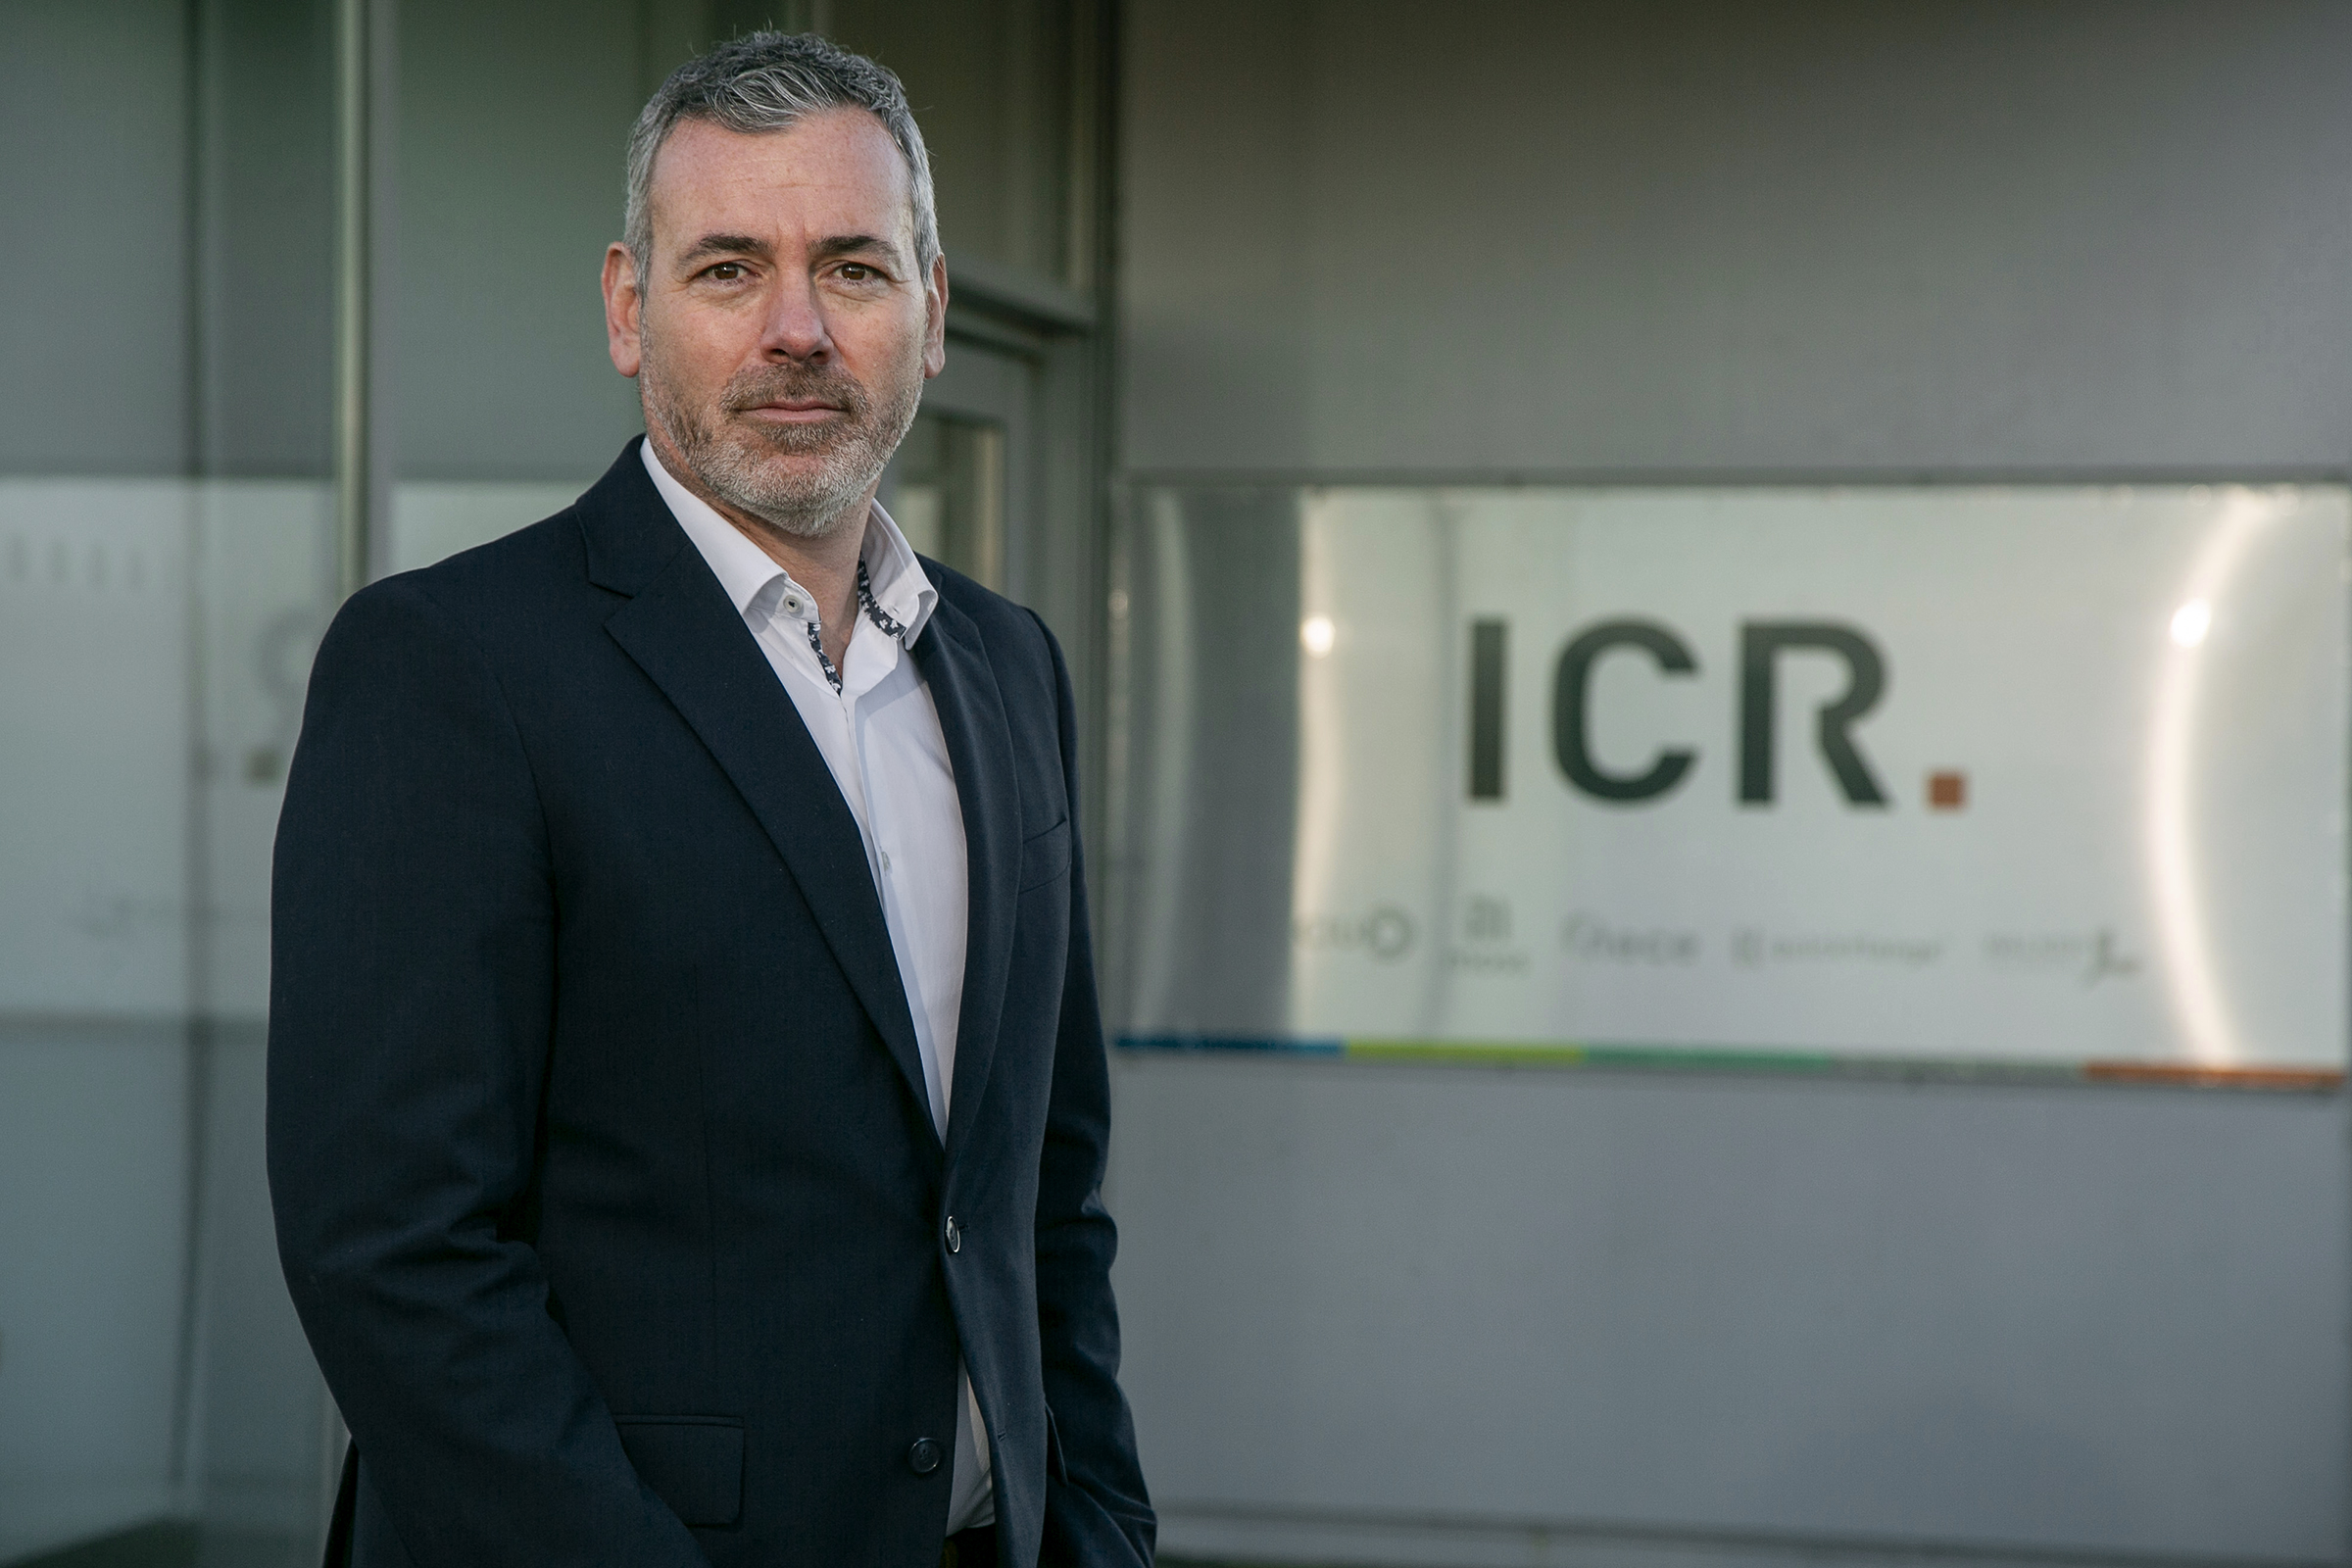 MEMBER NEWS: ICR Integrity announces new Group Director